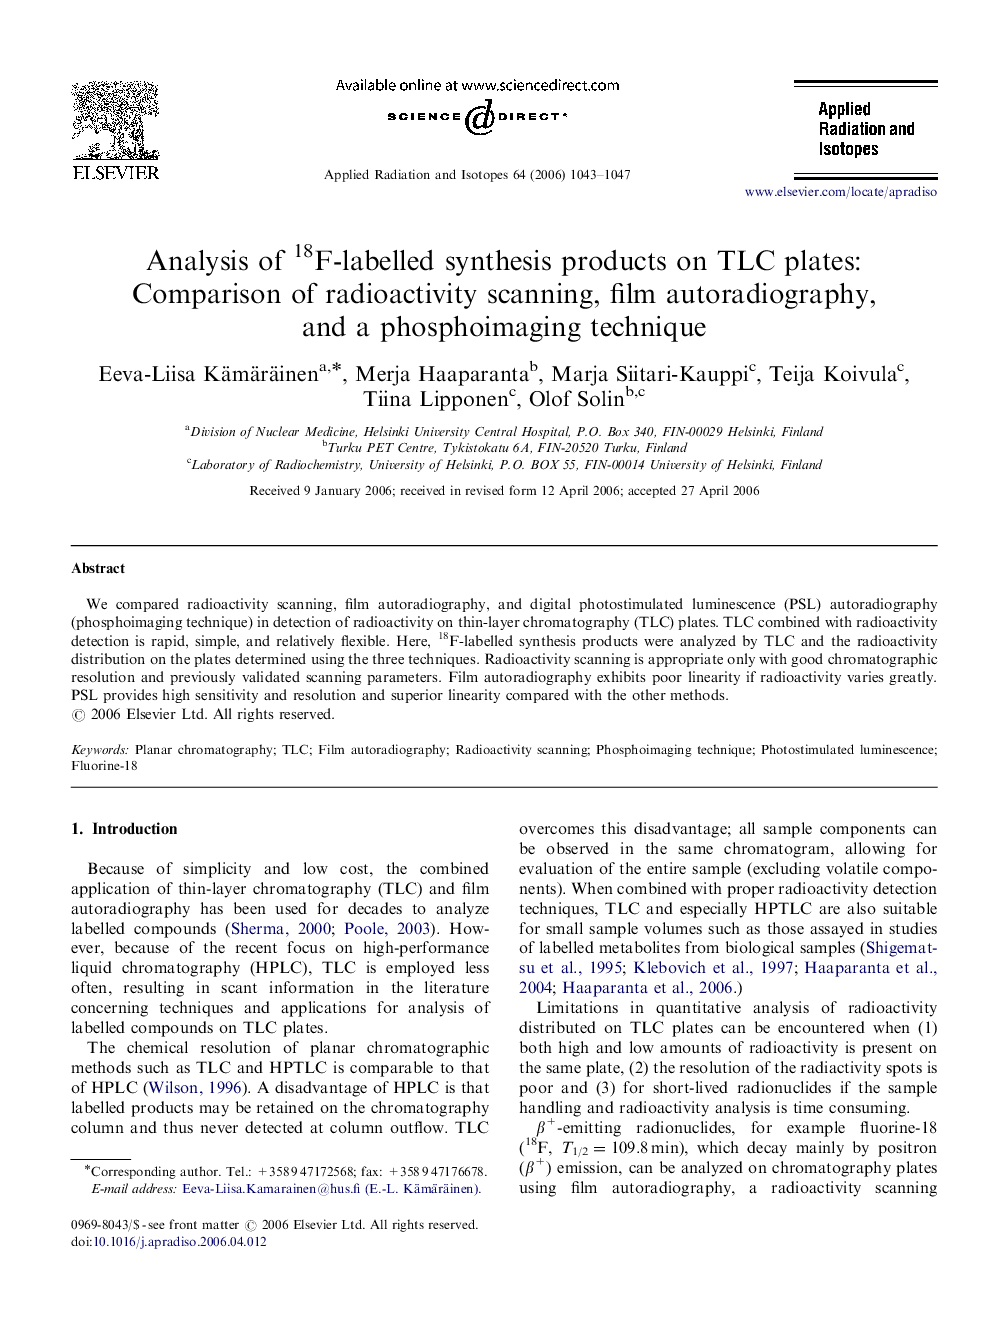 Analysis of 18F-labelled synthesis products on TLC plates: Comparison of radioactivity scanning, film autoradiography, and a phosphoimaging technique